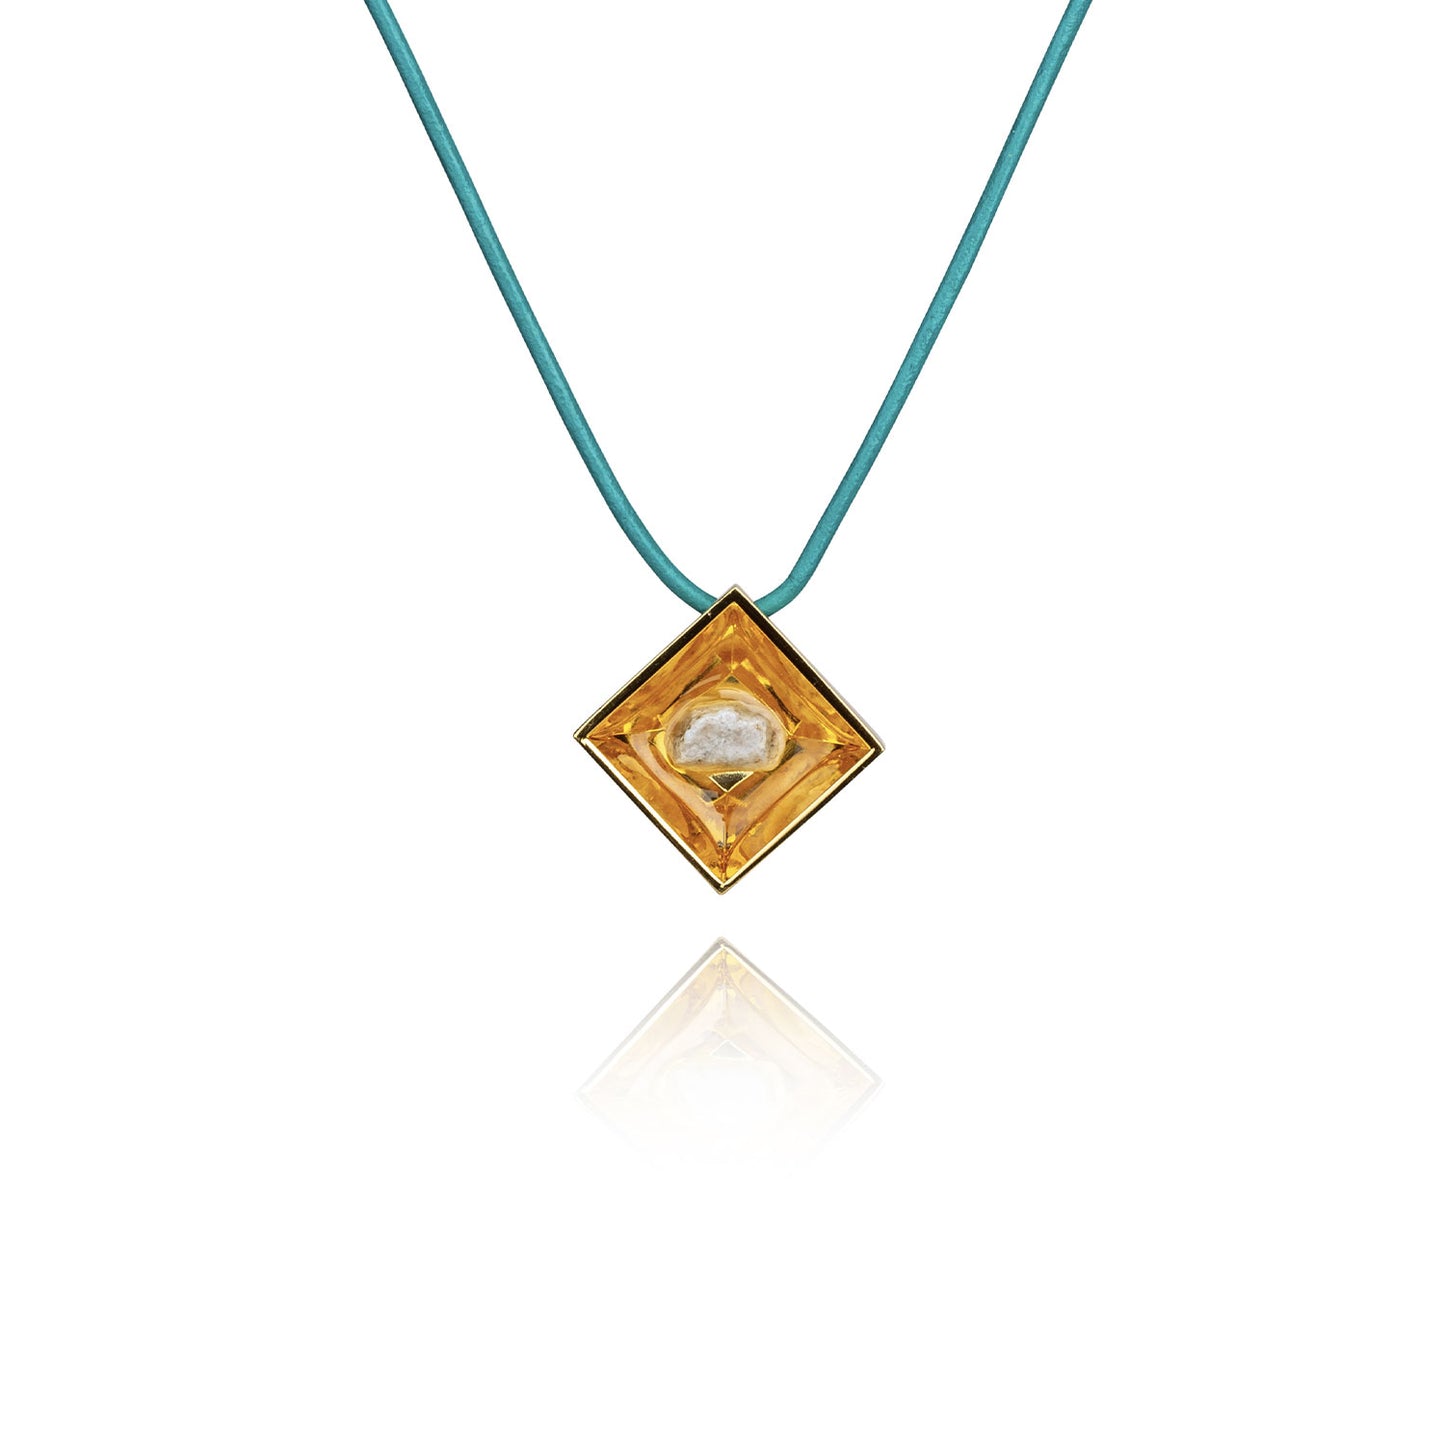 A small natural tan stone sitting in the middle of a diamond shaped metal pendant in a gold color. The pendant is hanging on a turquoise leather necklace.